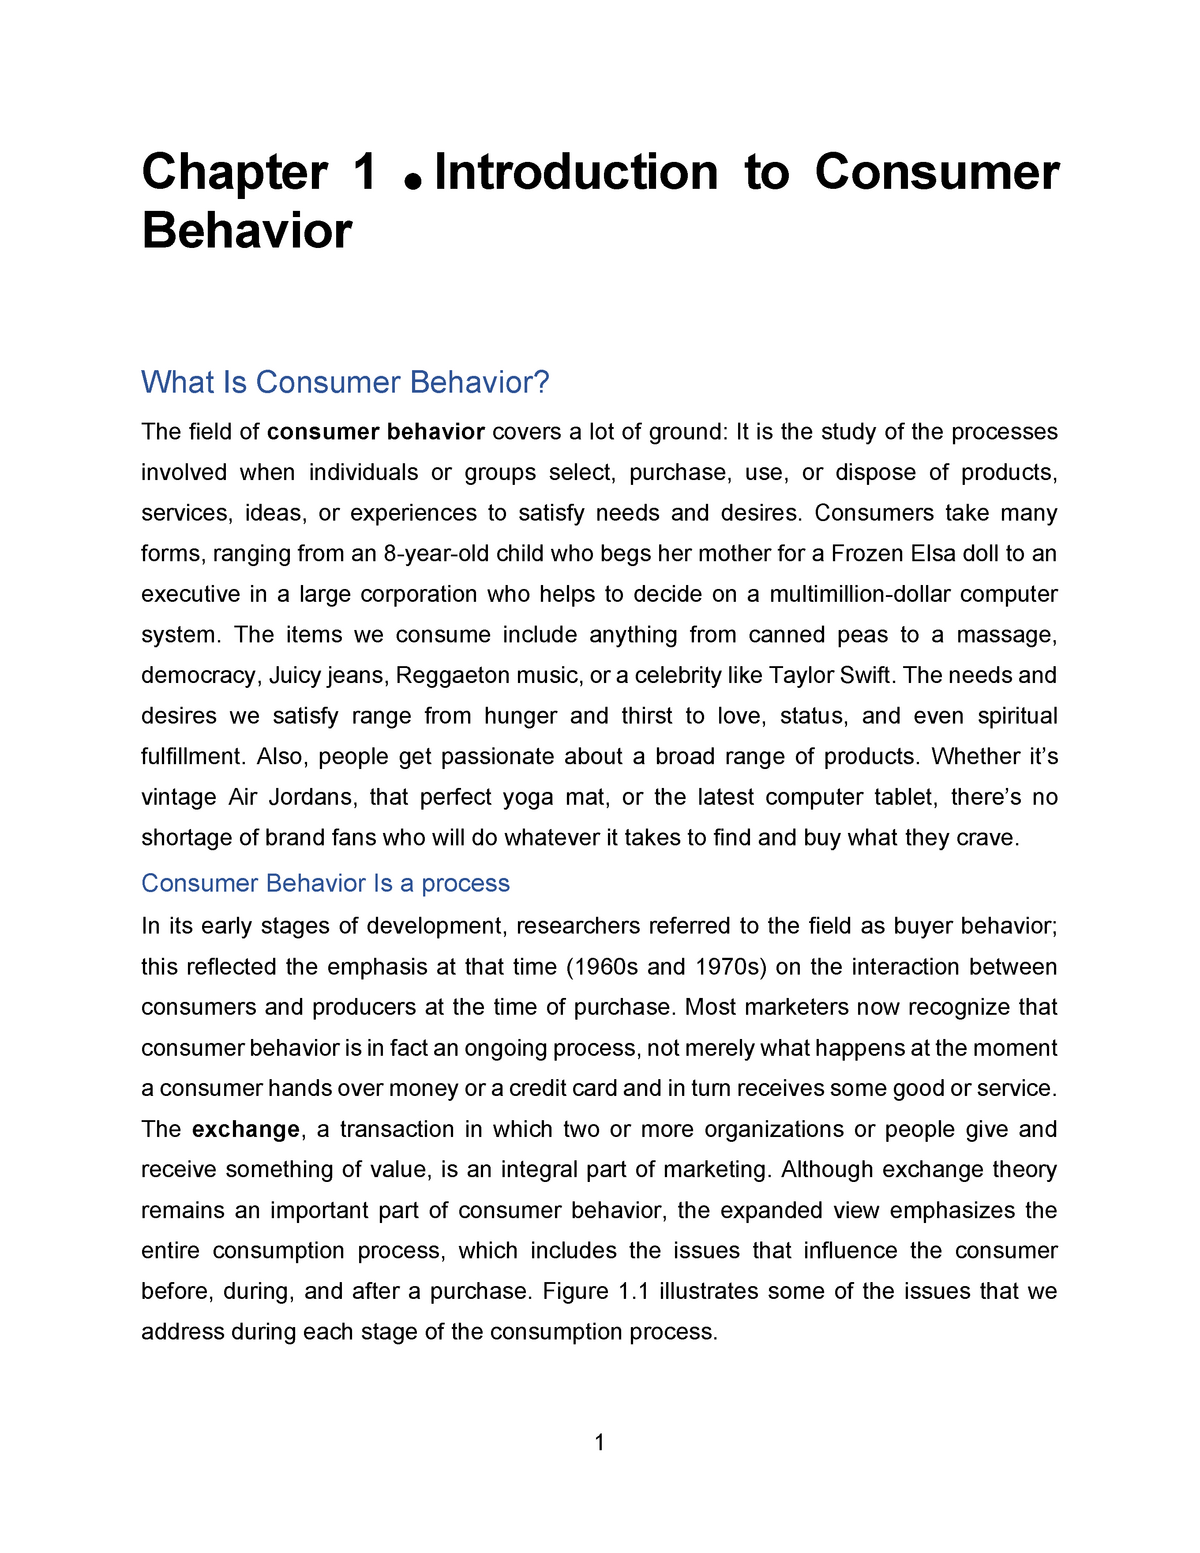 thesis title about consumer behavior